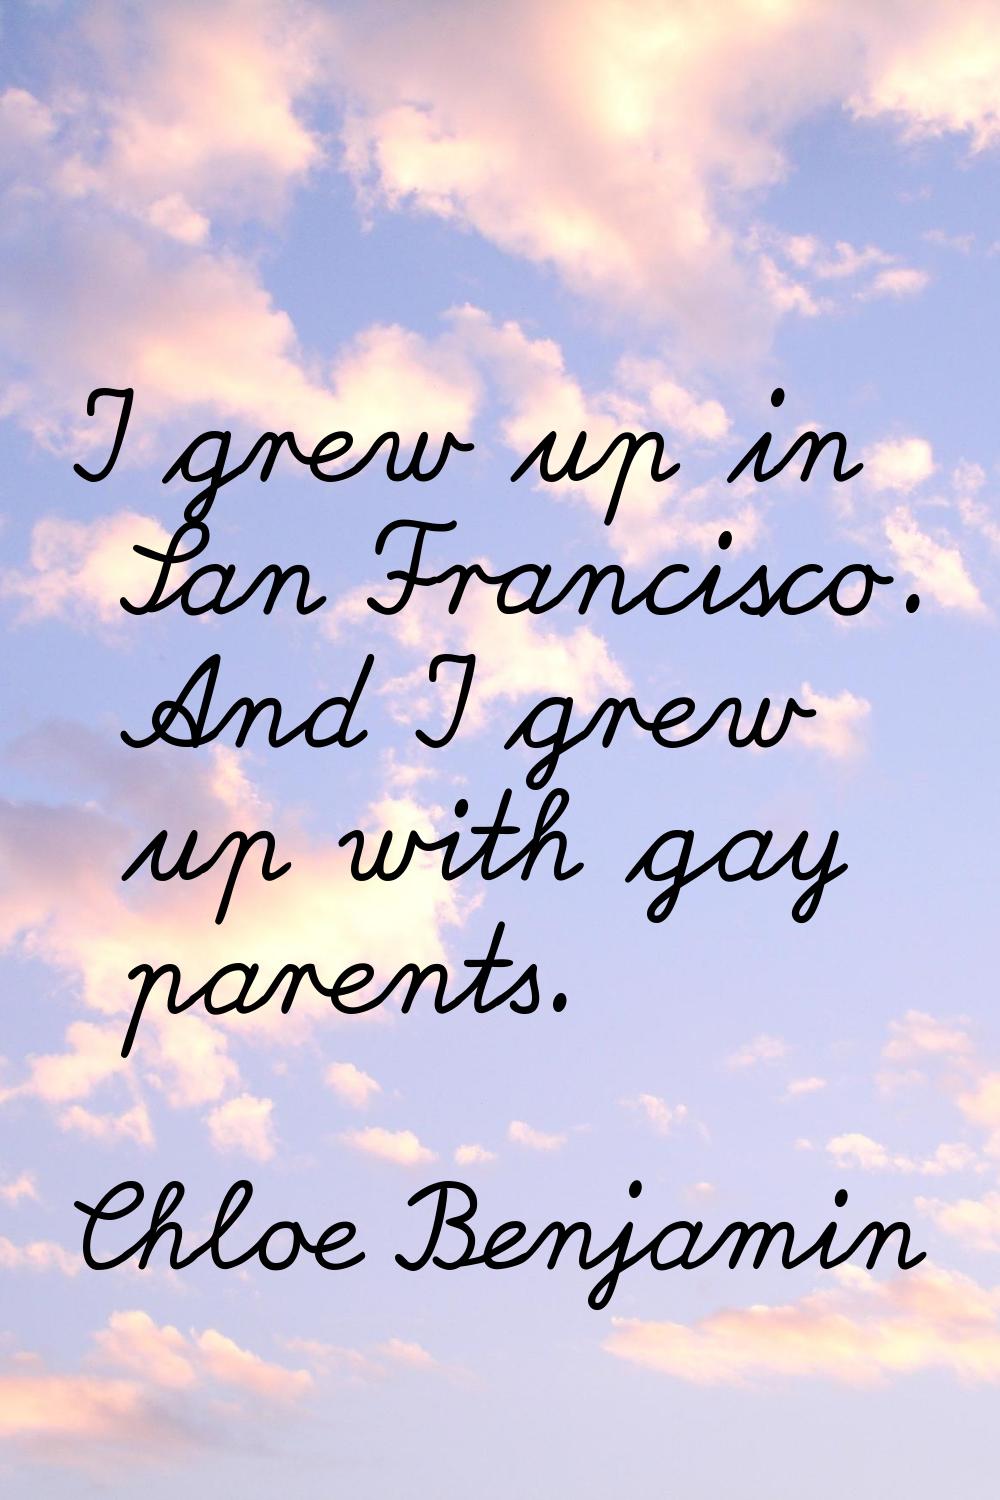 I grew up in San Francisco. And I grew up with gay parents.